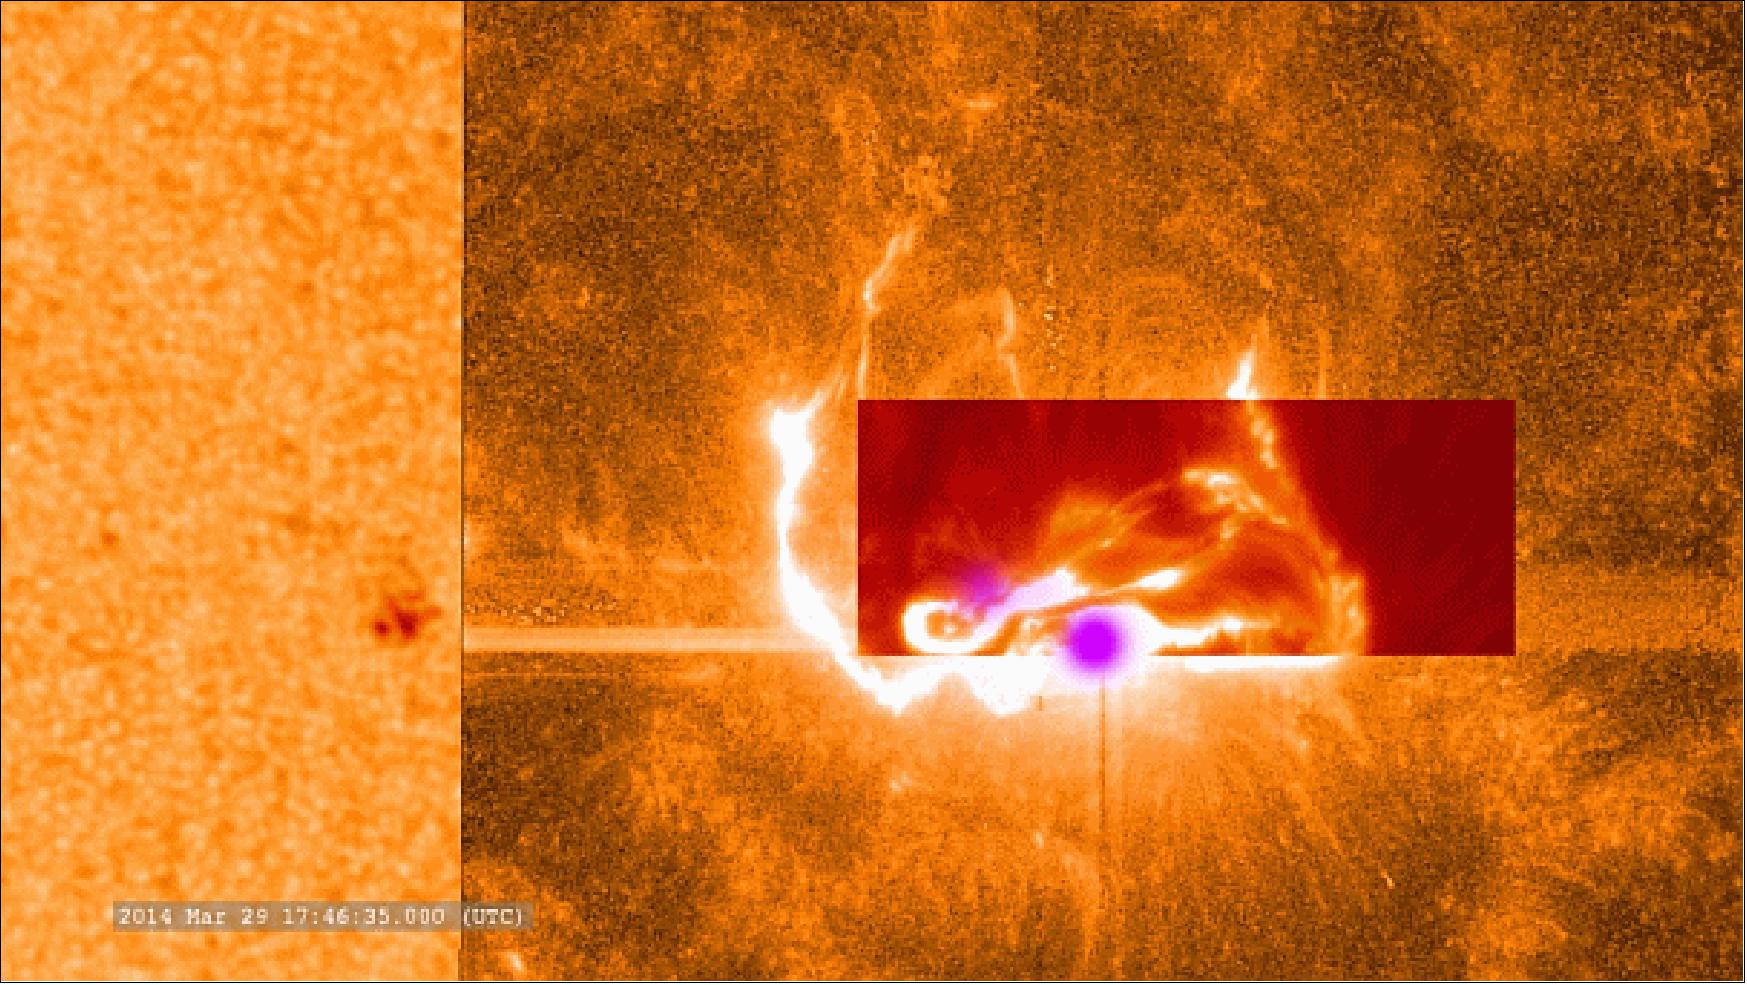 Figure 24: This combined image shows the March 29, 2014, X-class flare as seen through the eyes of different observatories. SDO is on the bottom/left, which helps show the position of the flare on the sun. The darker orange square is IRIS data. The red rectangular inset is from Sacramento Peak. The violet spots show the flare's footpoints from RHESSI (image credit: NASA/GSFC)